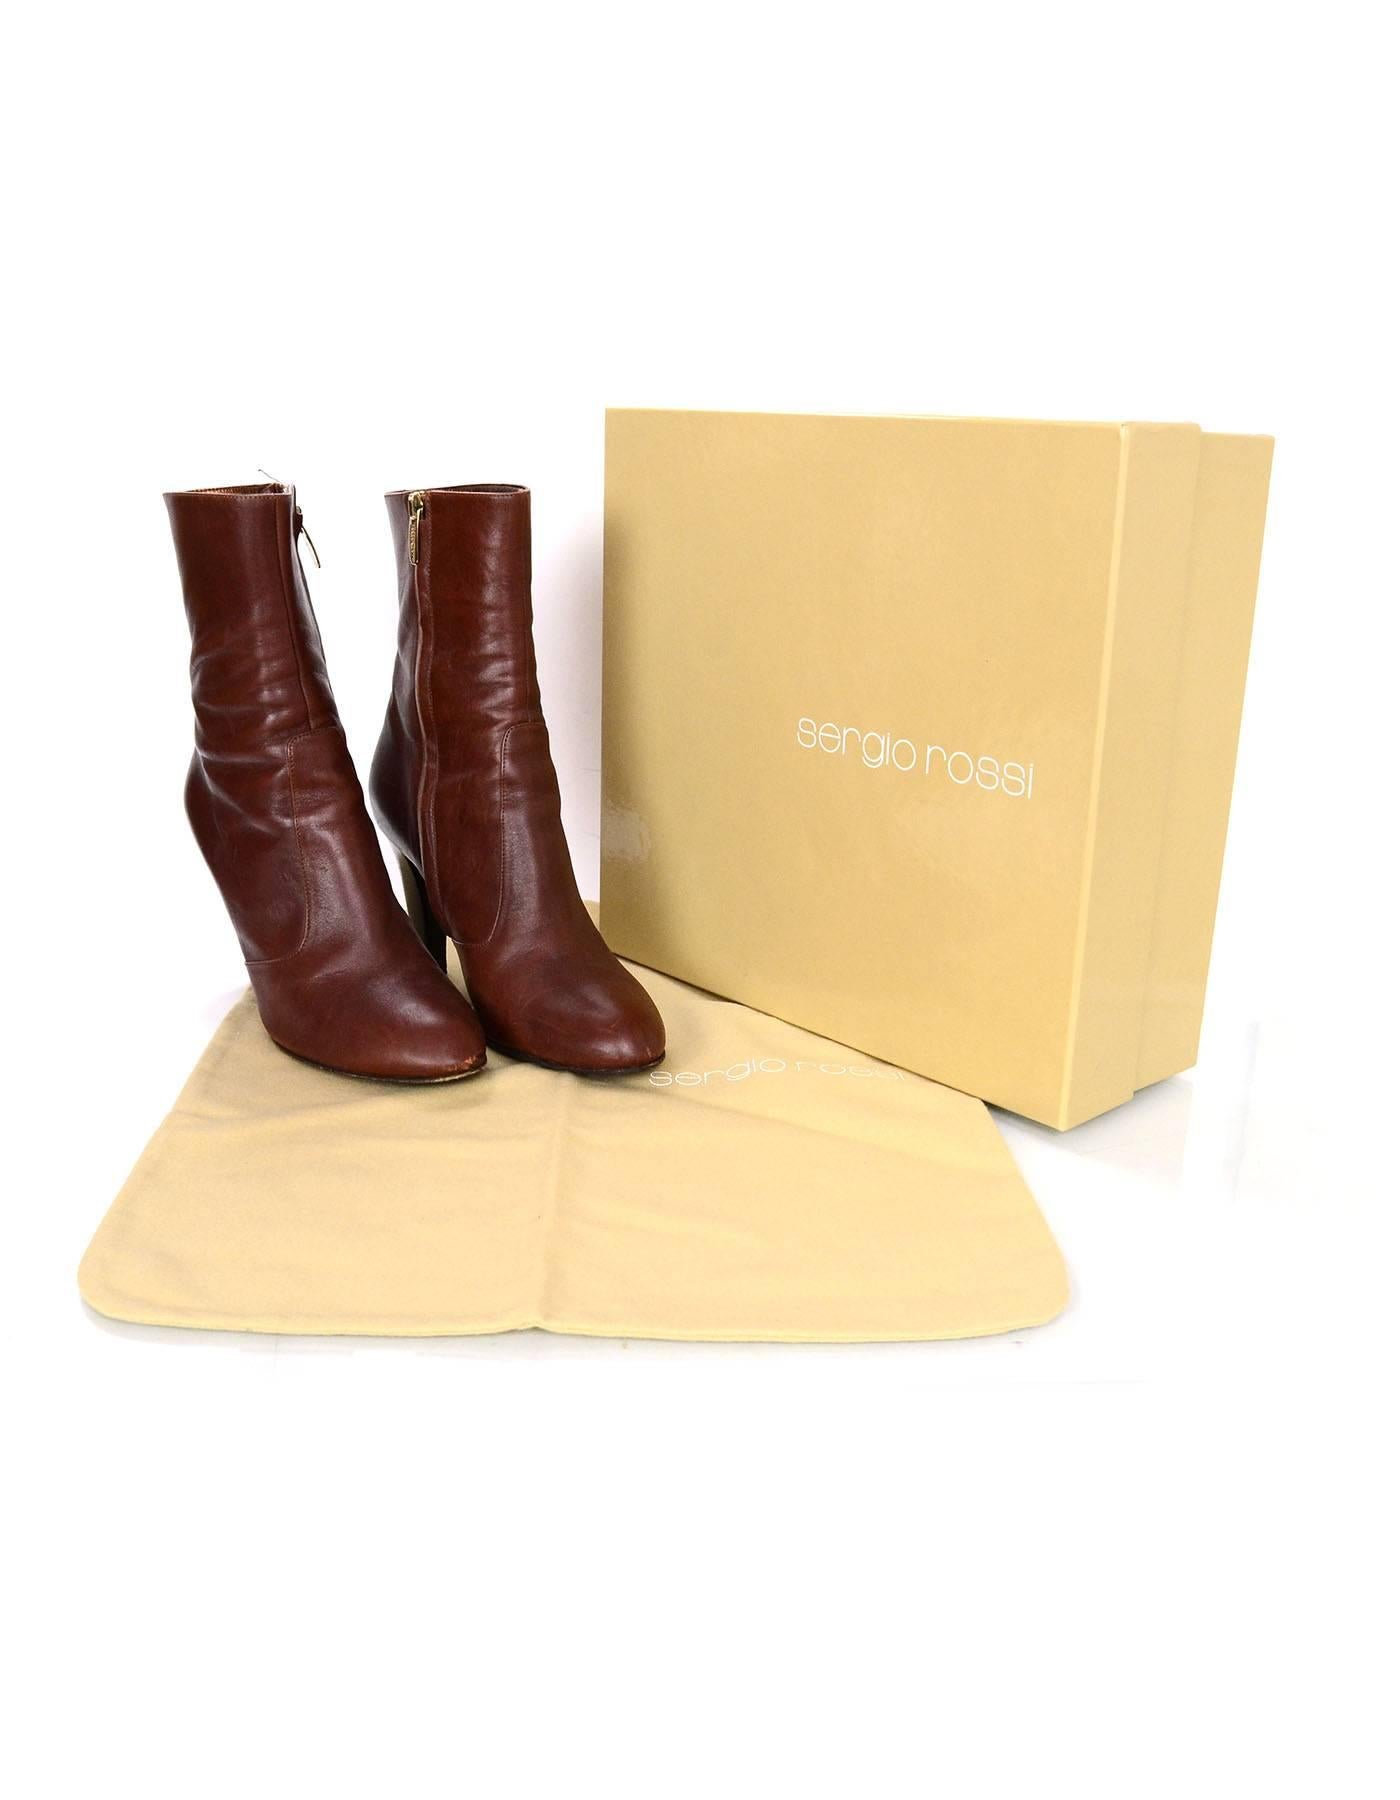 Sergio Rossi Brown Leather Ankle Boots sz 37.5 rt. $675 4